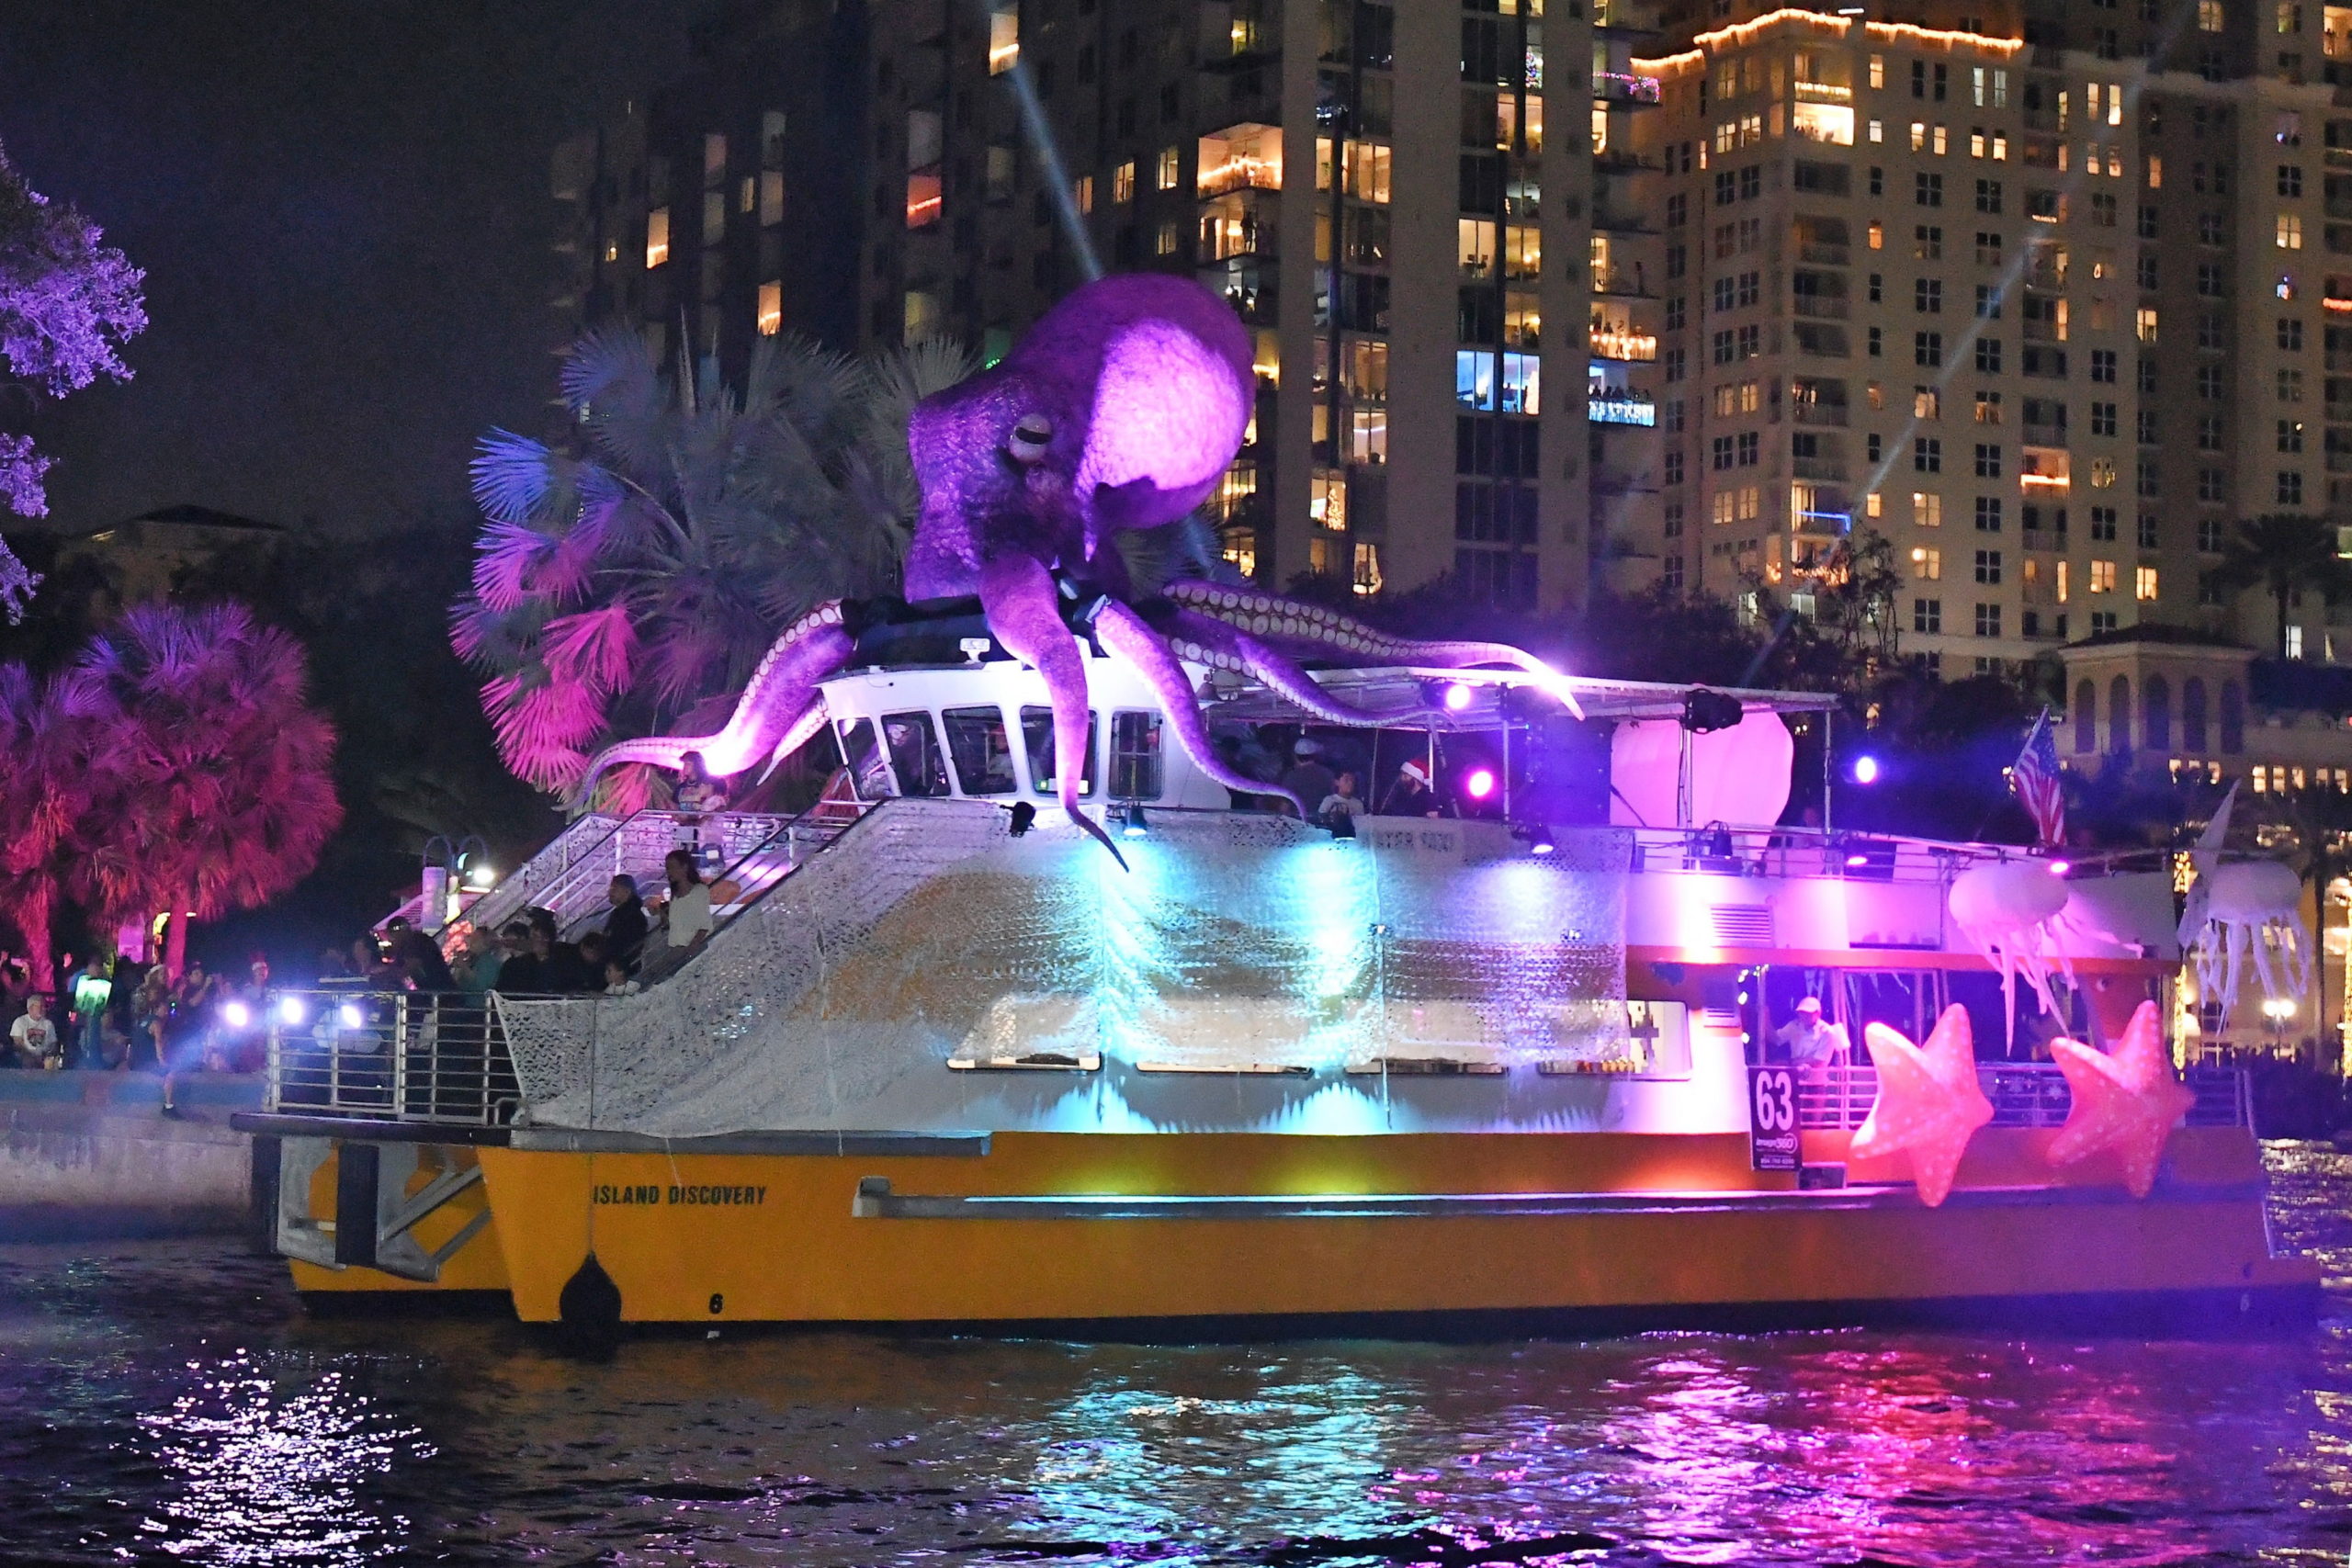 Water Taxi Island Discovery with Winterfest Octopus, boat number 63 in the 2022 Winterfest Boat Parade